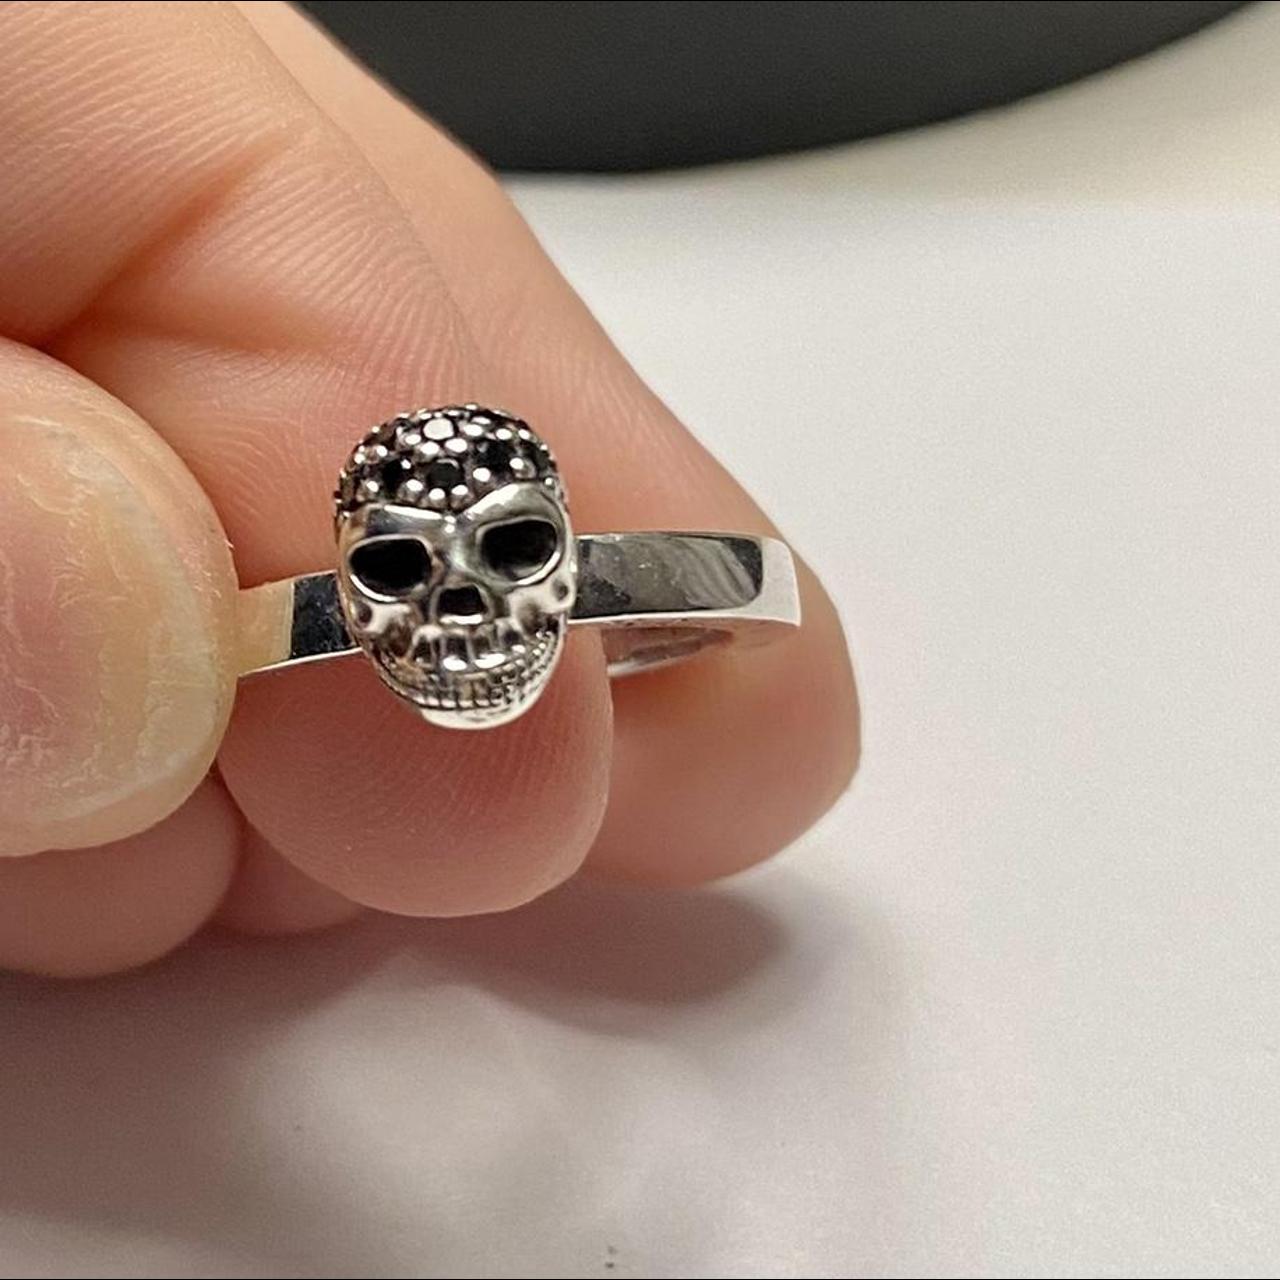 Product Image 1 - Skull Ring 😍 size 7
Excellent